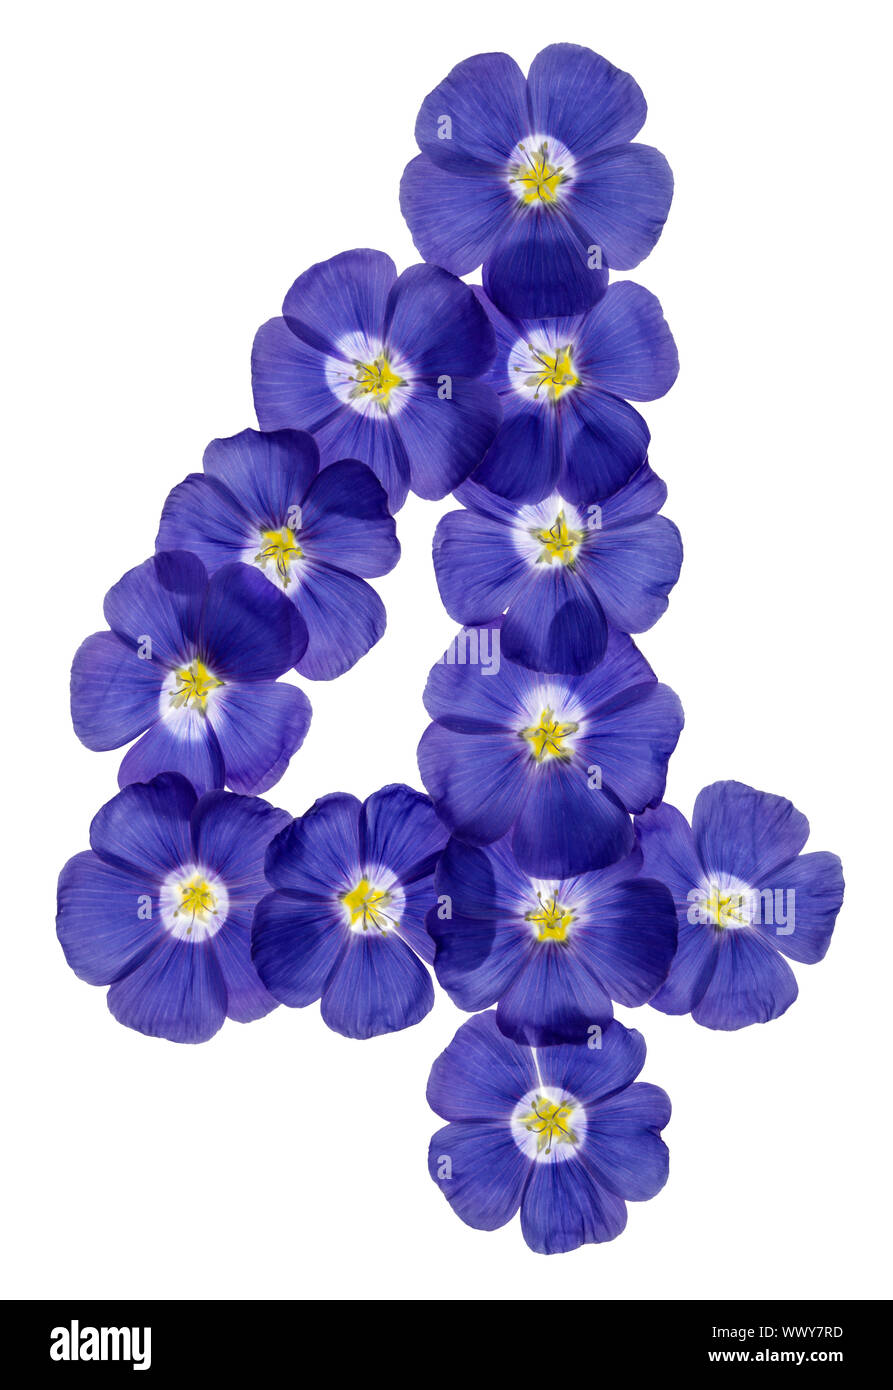 Arabic numeral 4, four, from blue flowers of flax, isolated on white background Stock Photo